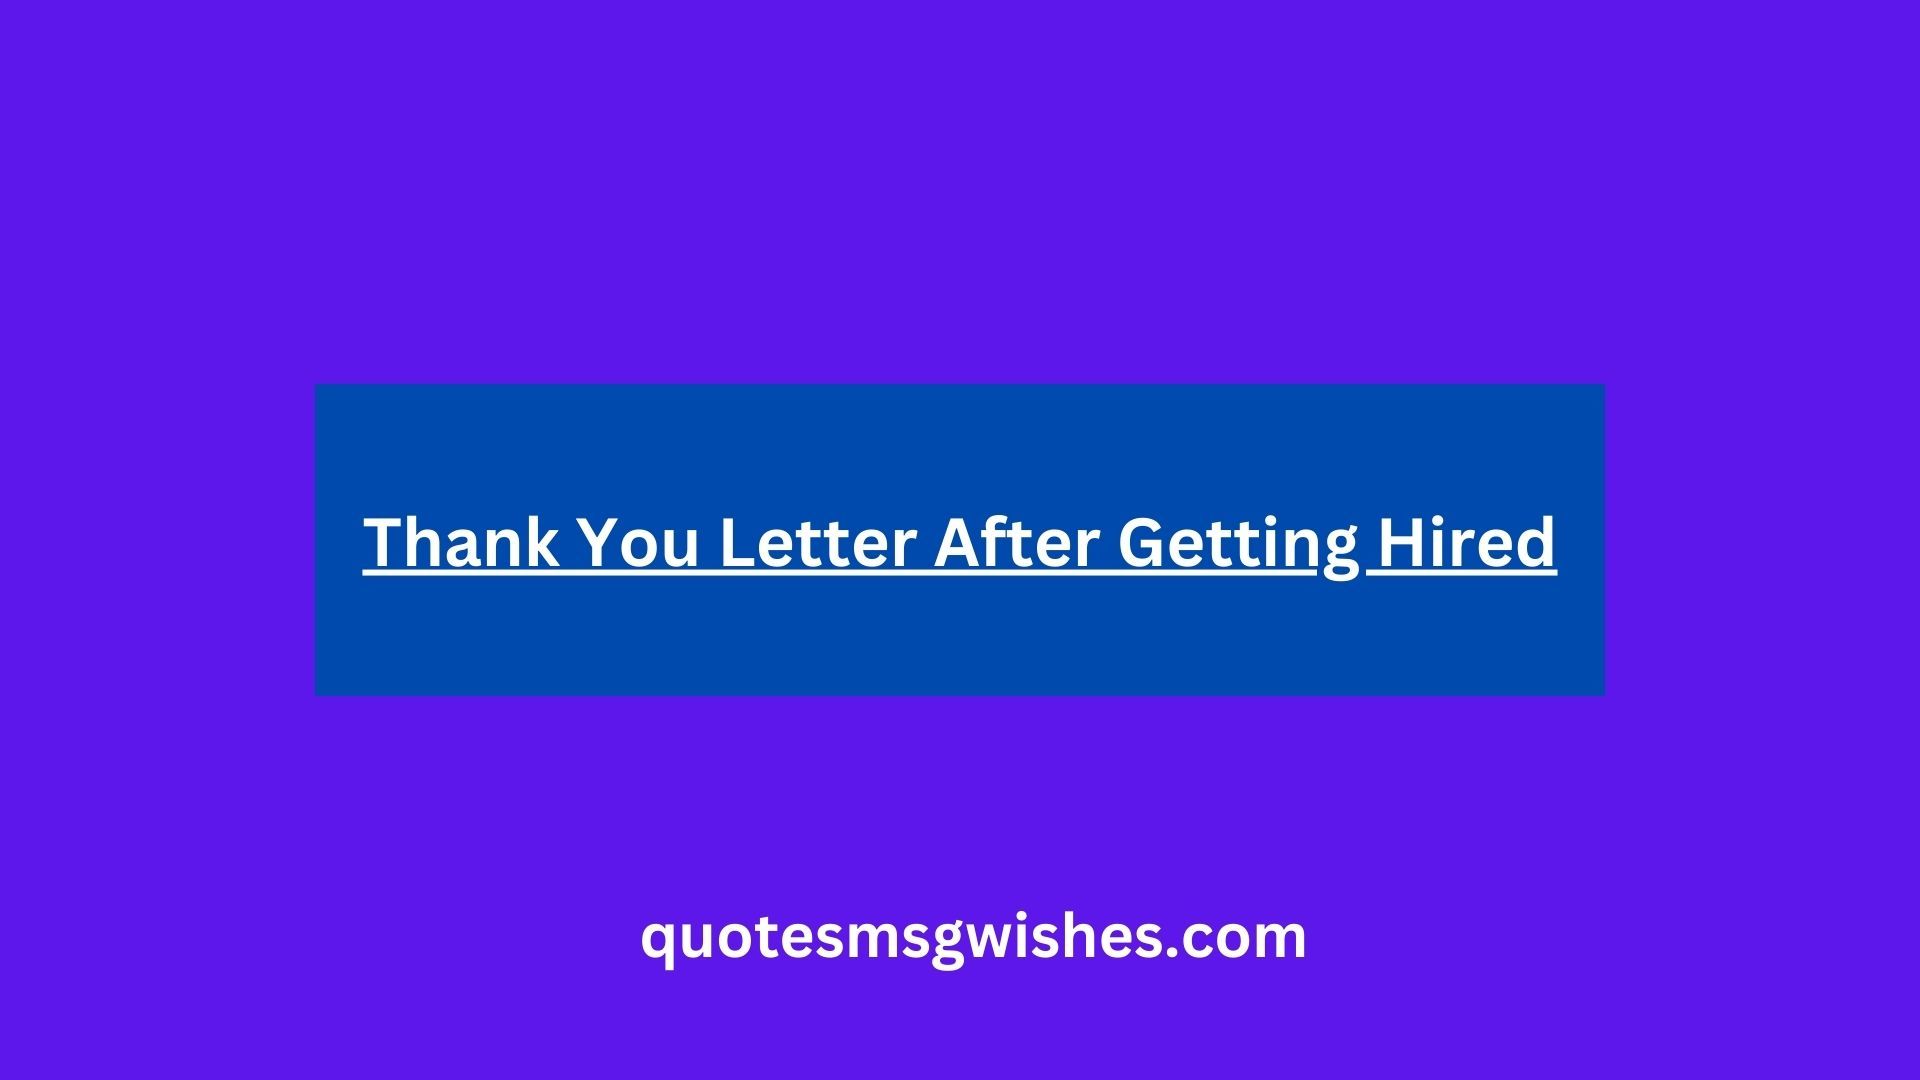 Thank You Letter After Getting Hired